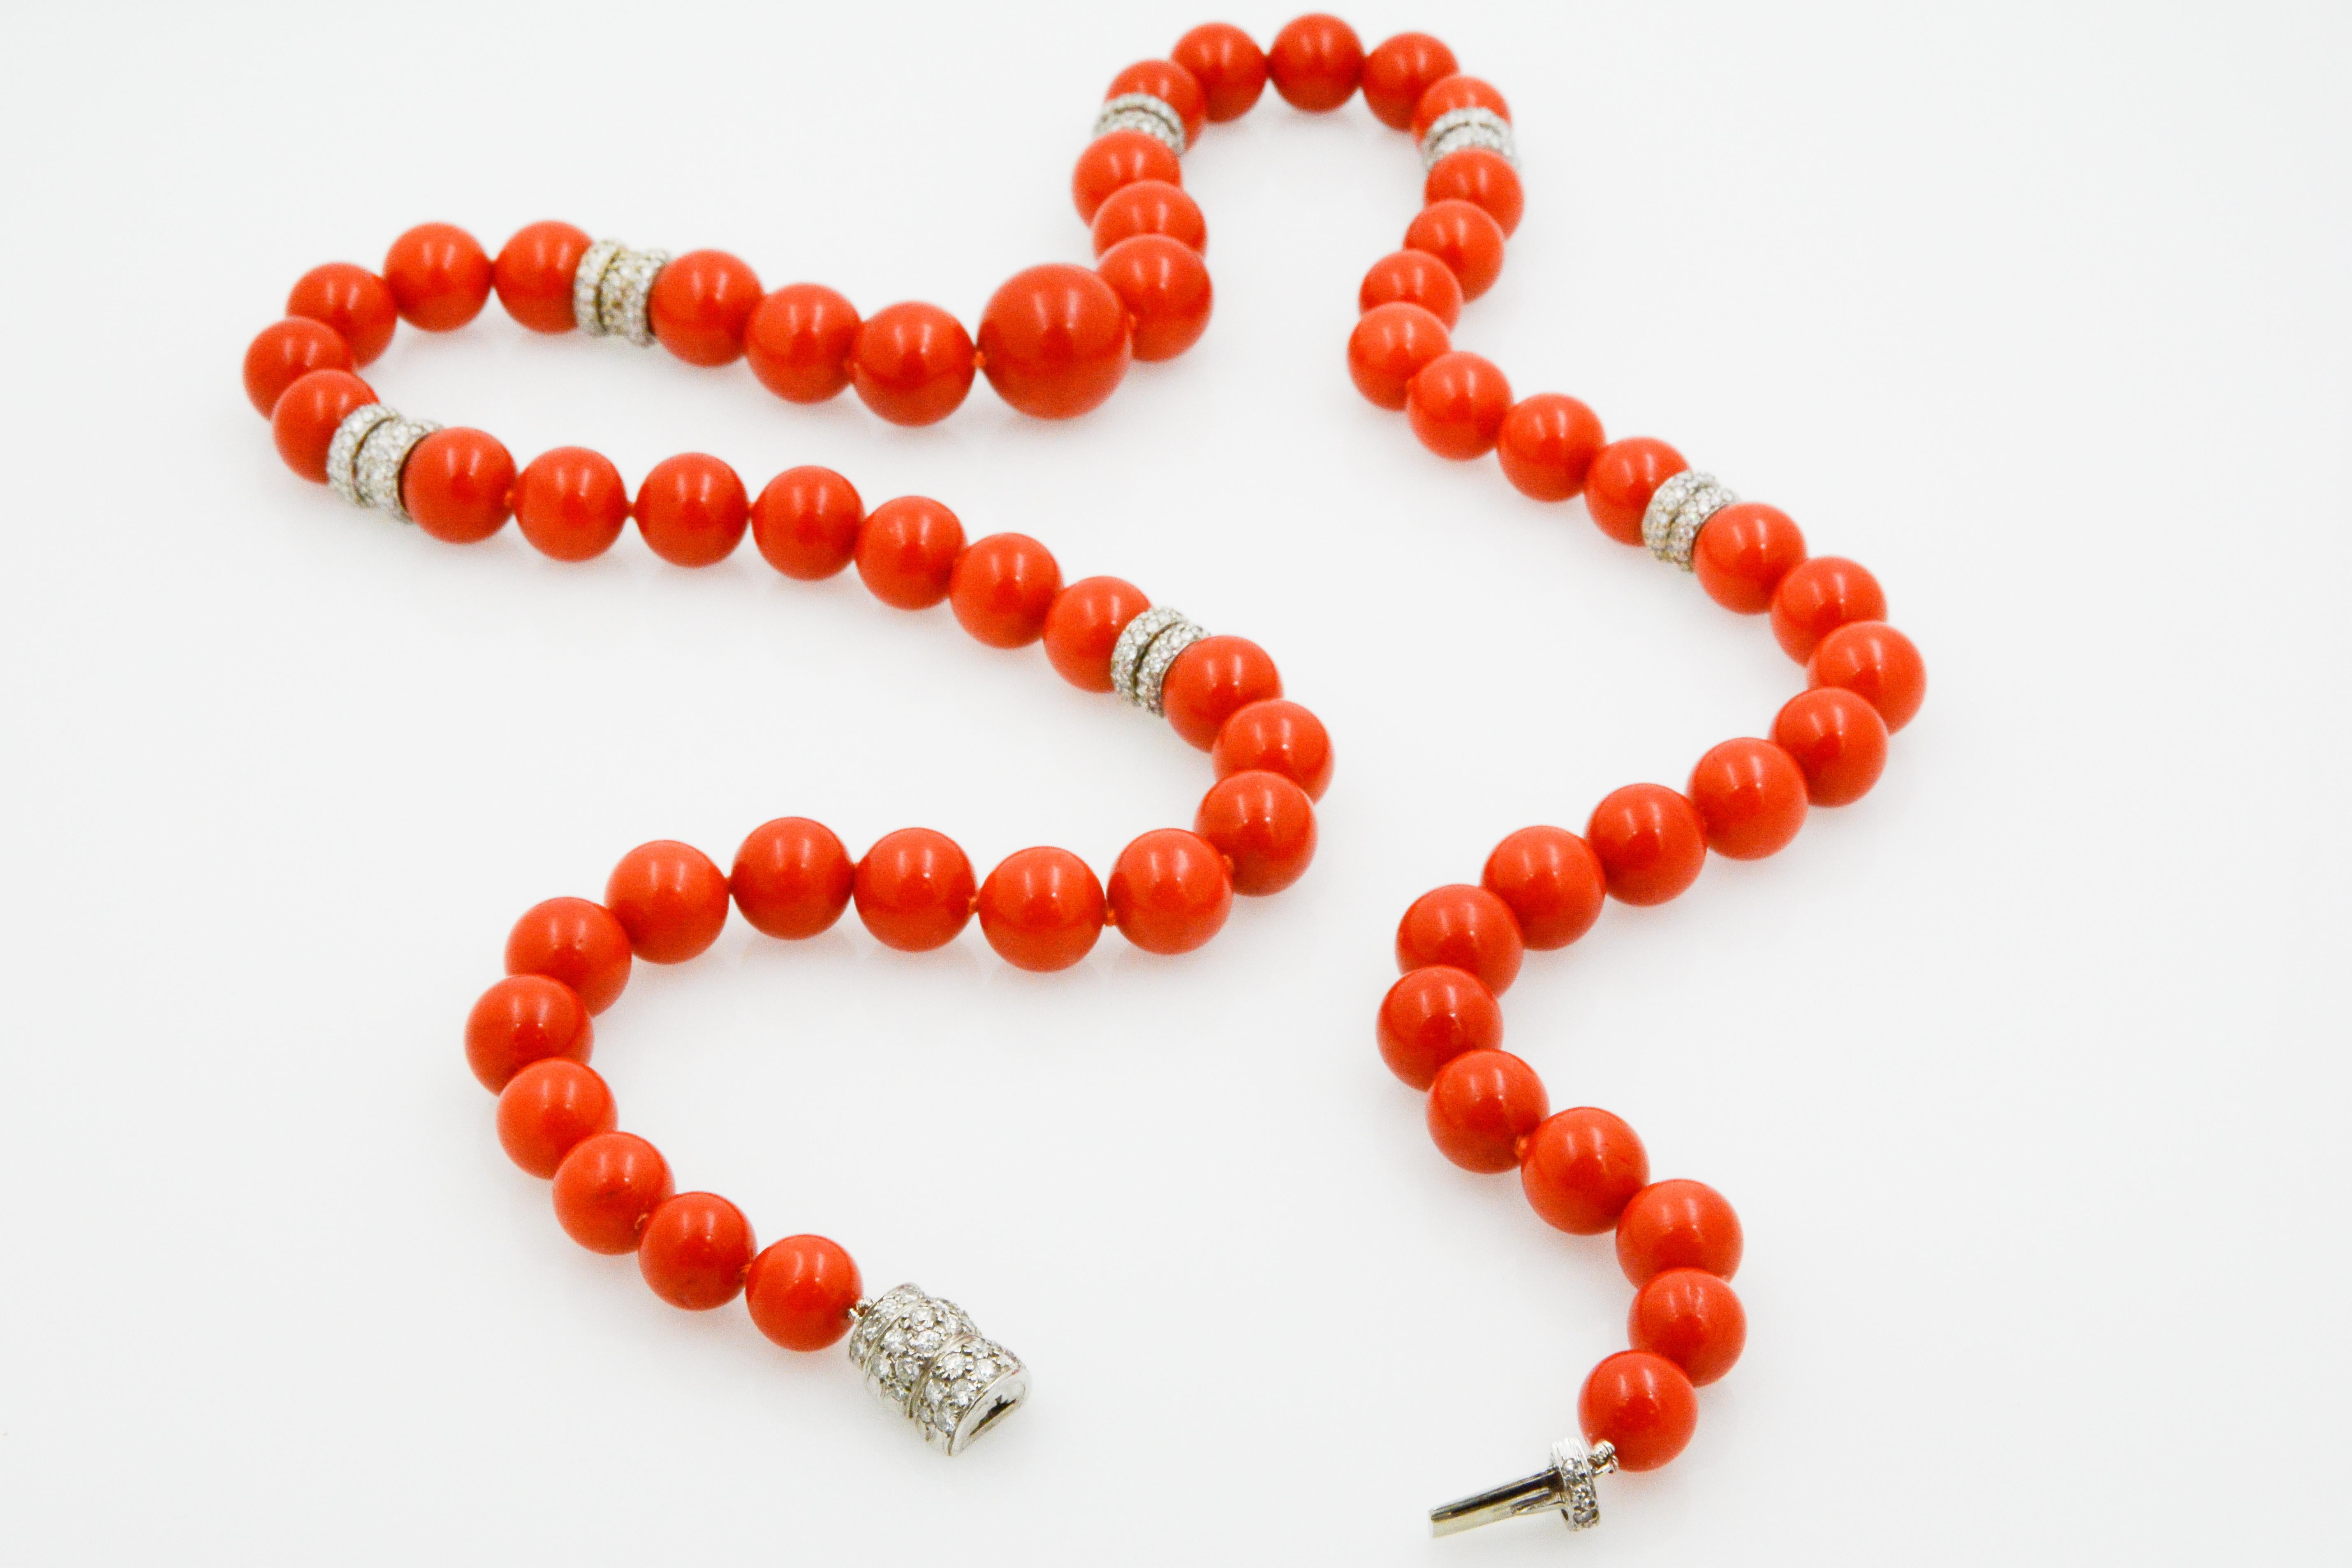 This stately necklace has a strand of 59 graduated Mediterranean coral beads that each measures at 15.5 x 8mm. The necklace has splashes of six 14 karat white gold pave rondelles decorated with 34 round brilliant diamonds, weighing a total of 2.16